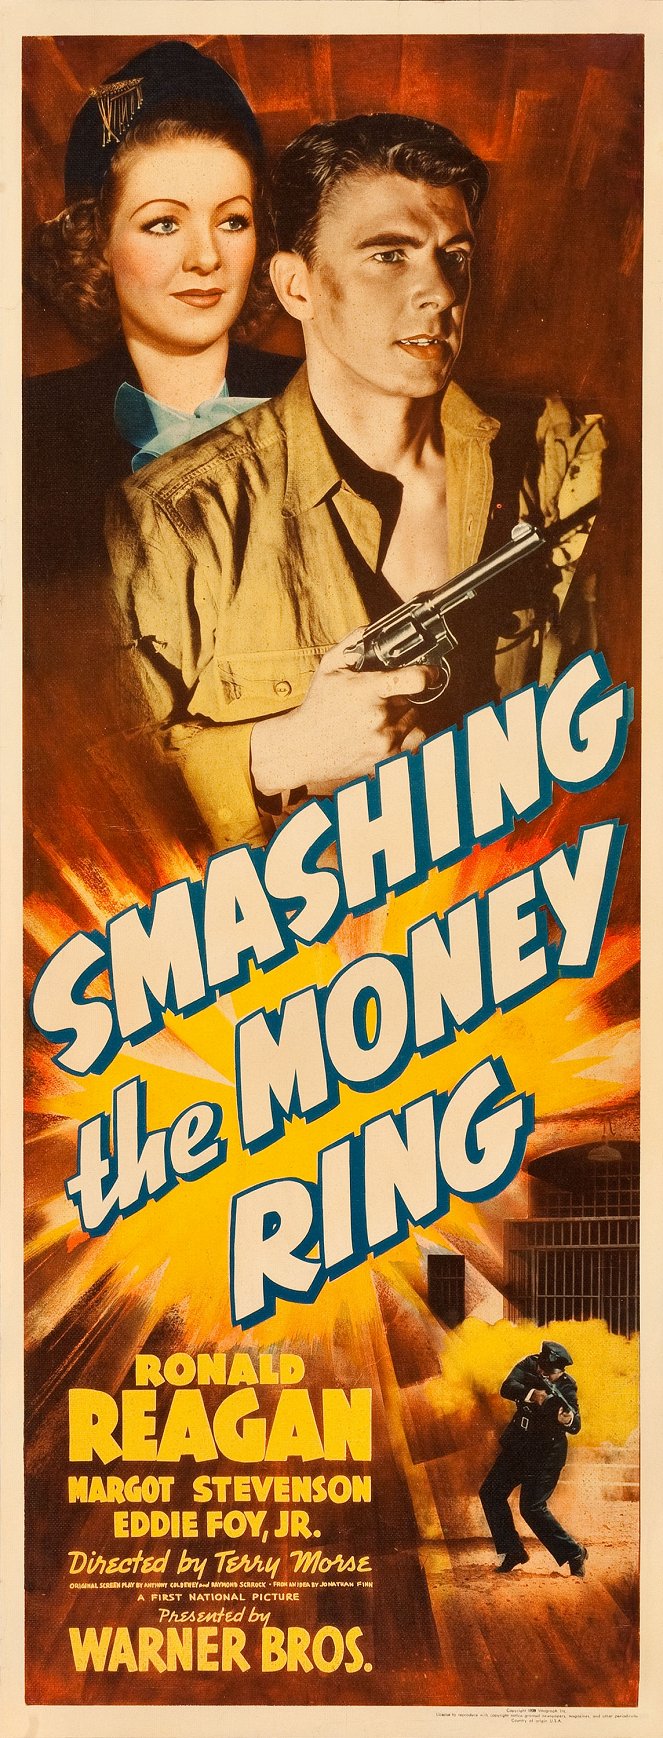 Smashing the Money Ring - Posters